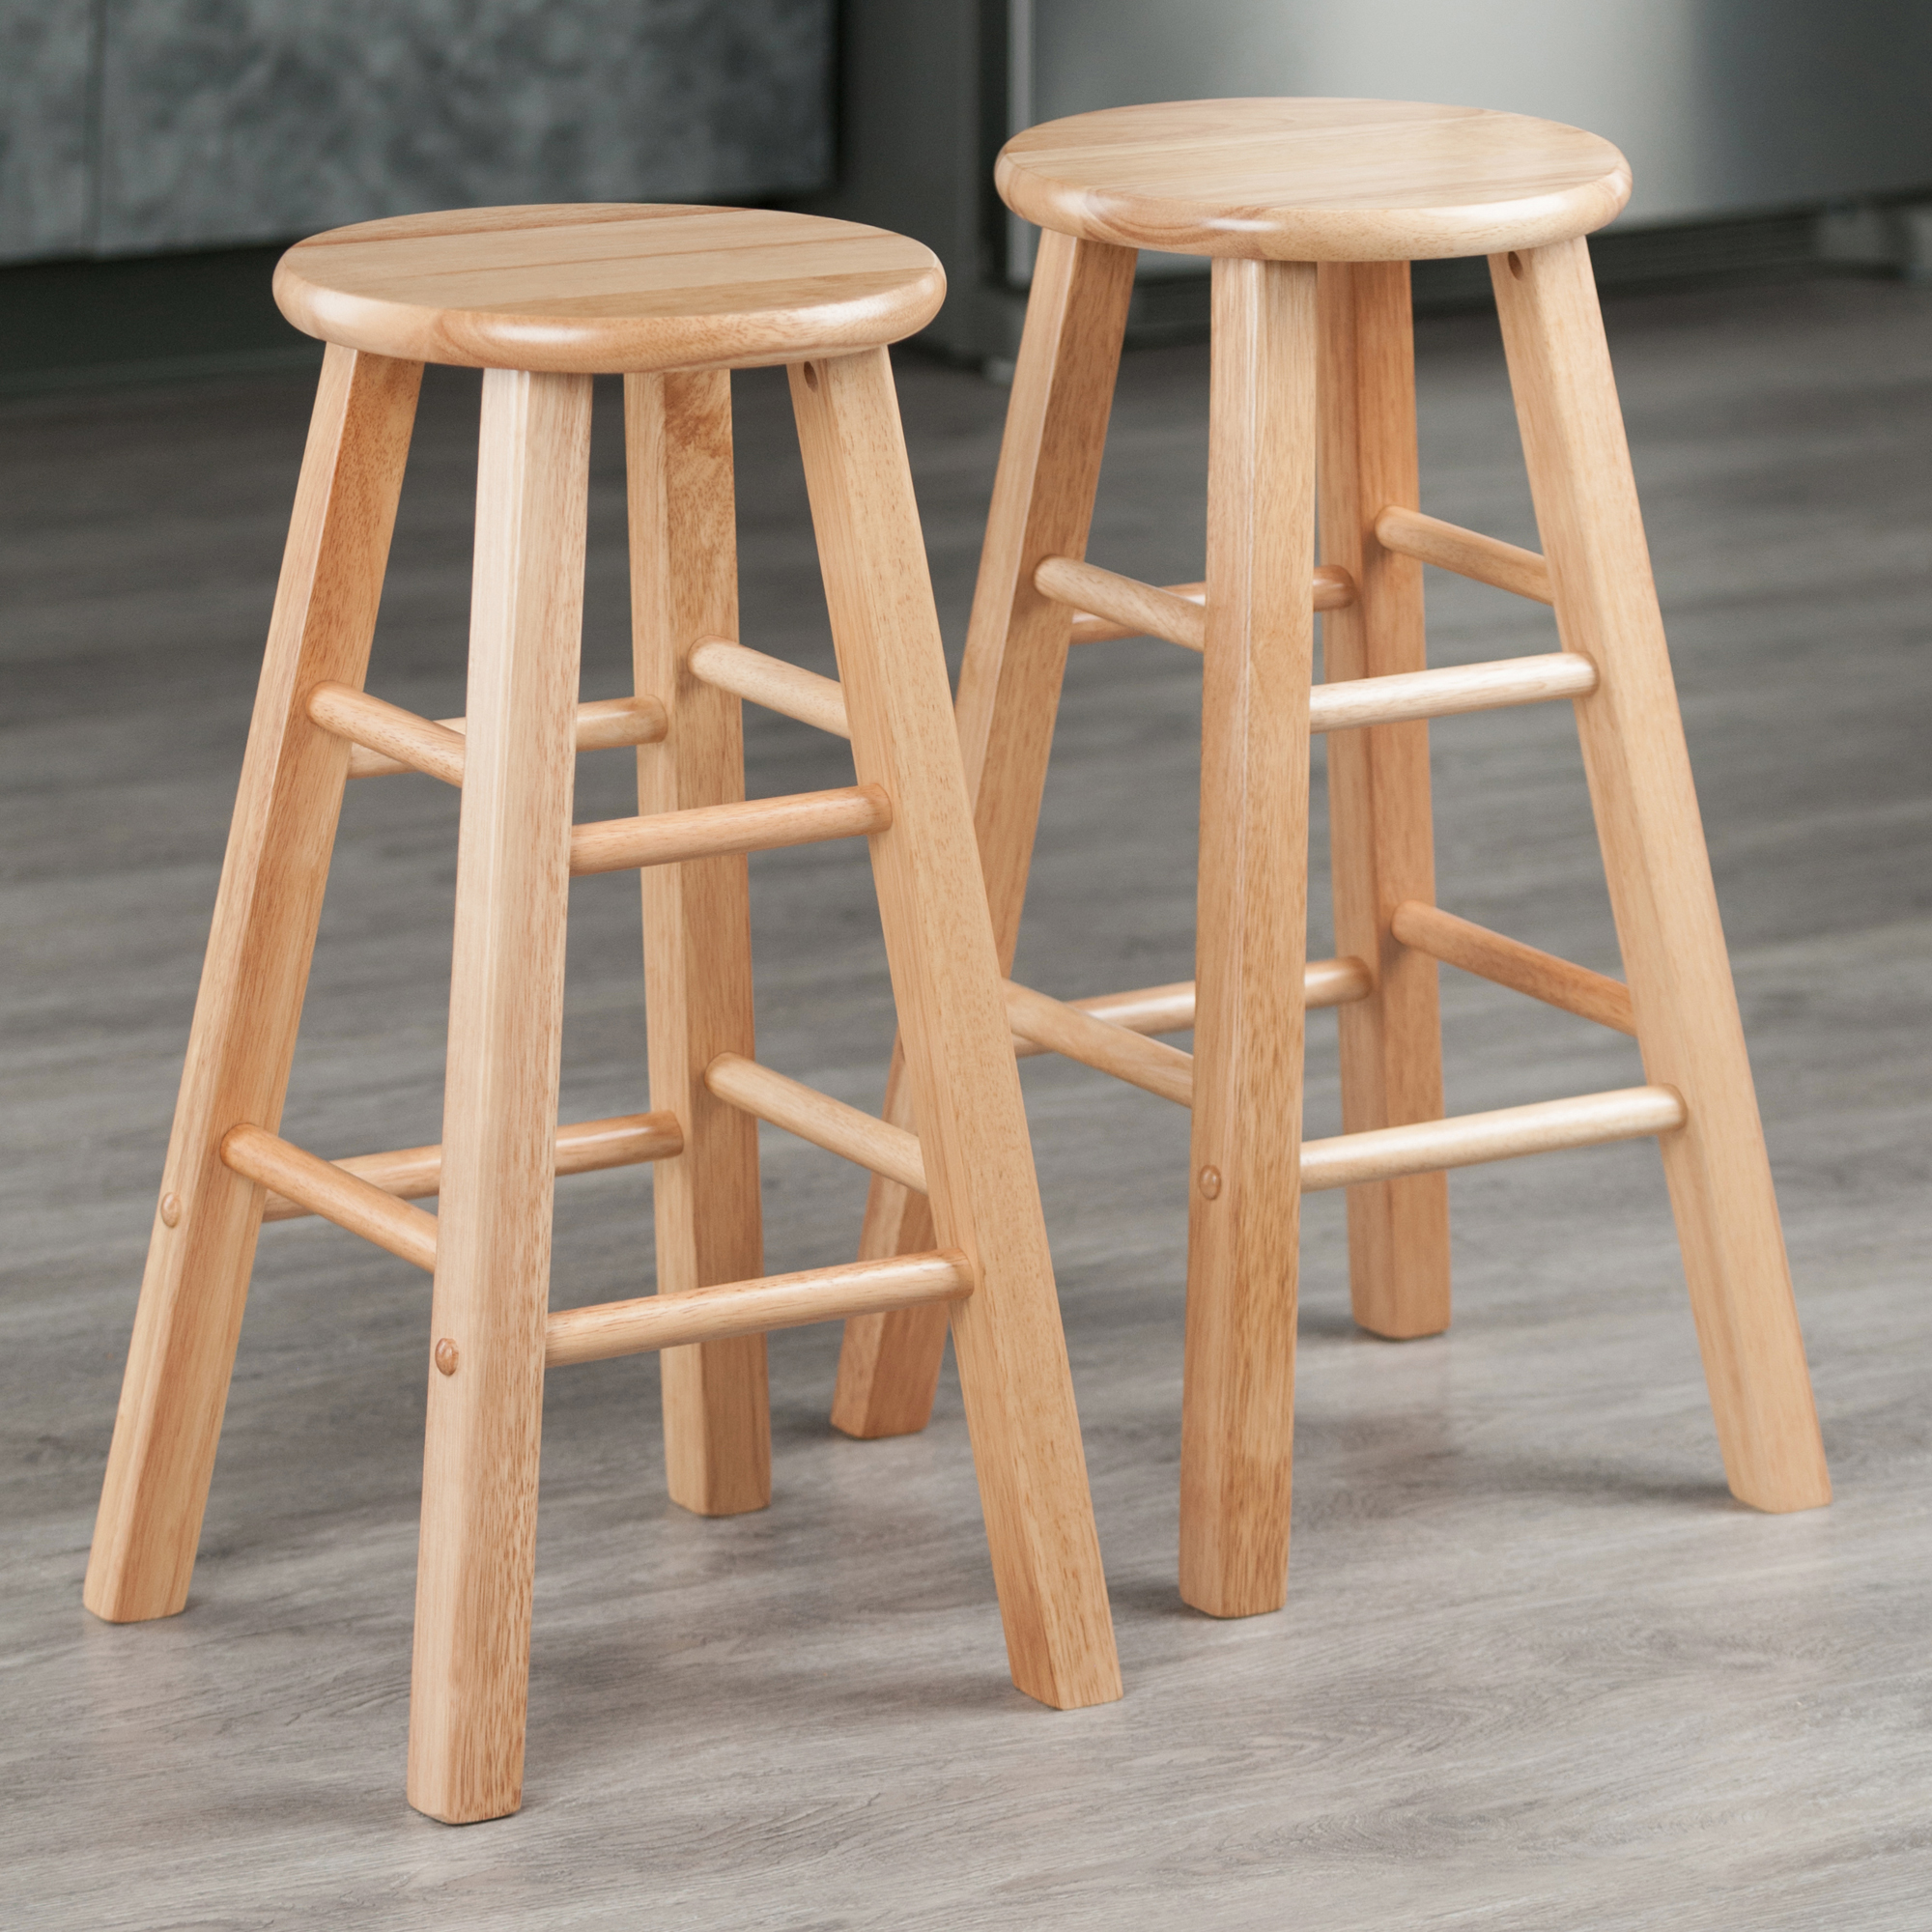 Winsome Wood Element 2-Piece Counter Stools, Natural Finish - image 2 of 8